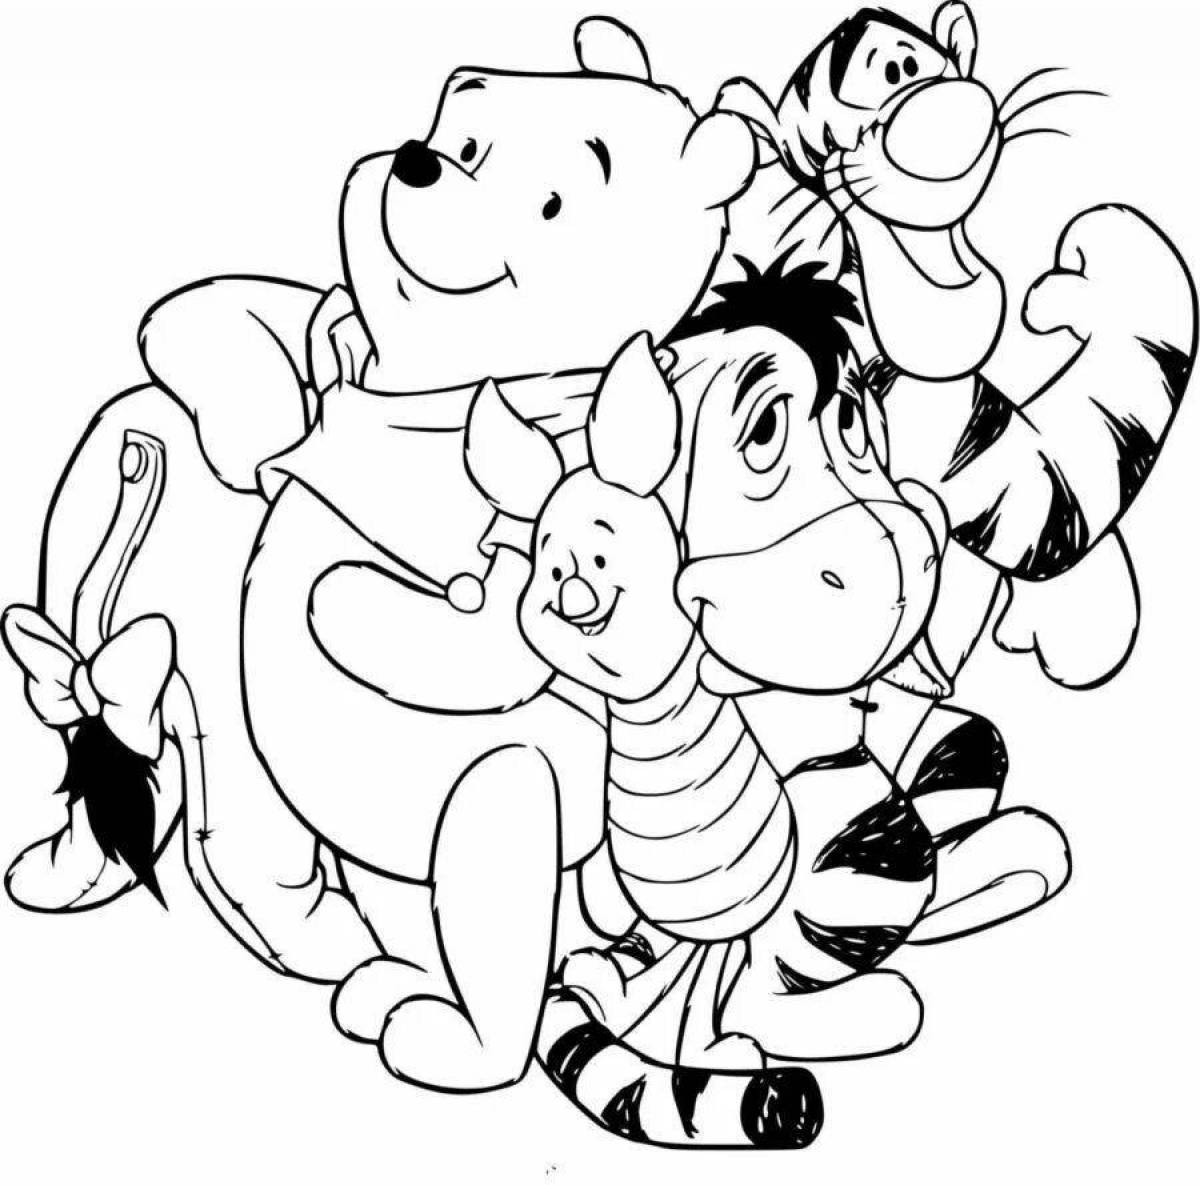 Winnie the pooh and his friends #2